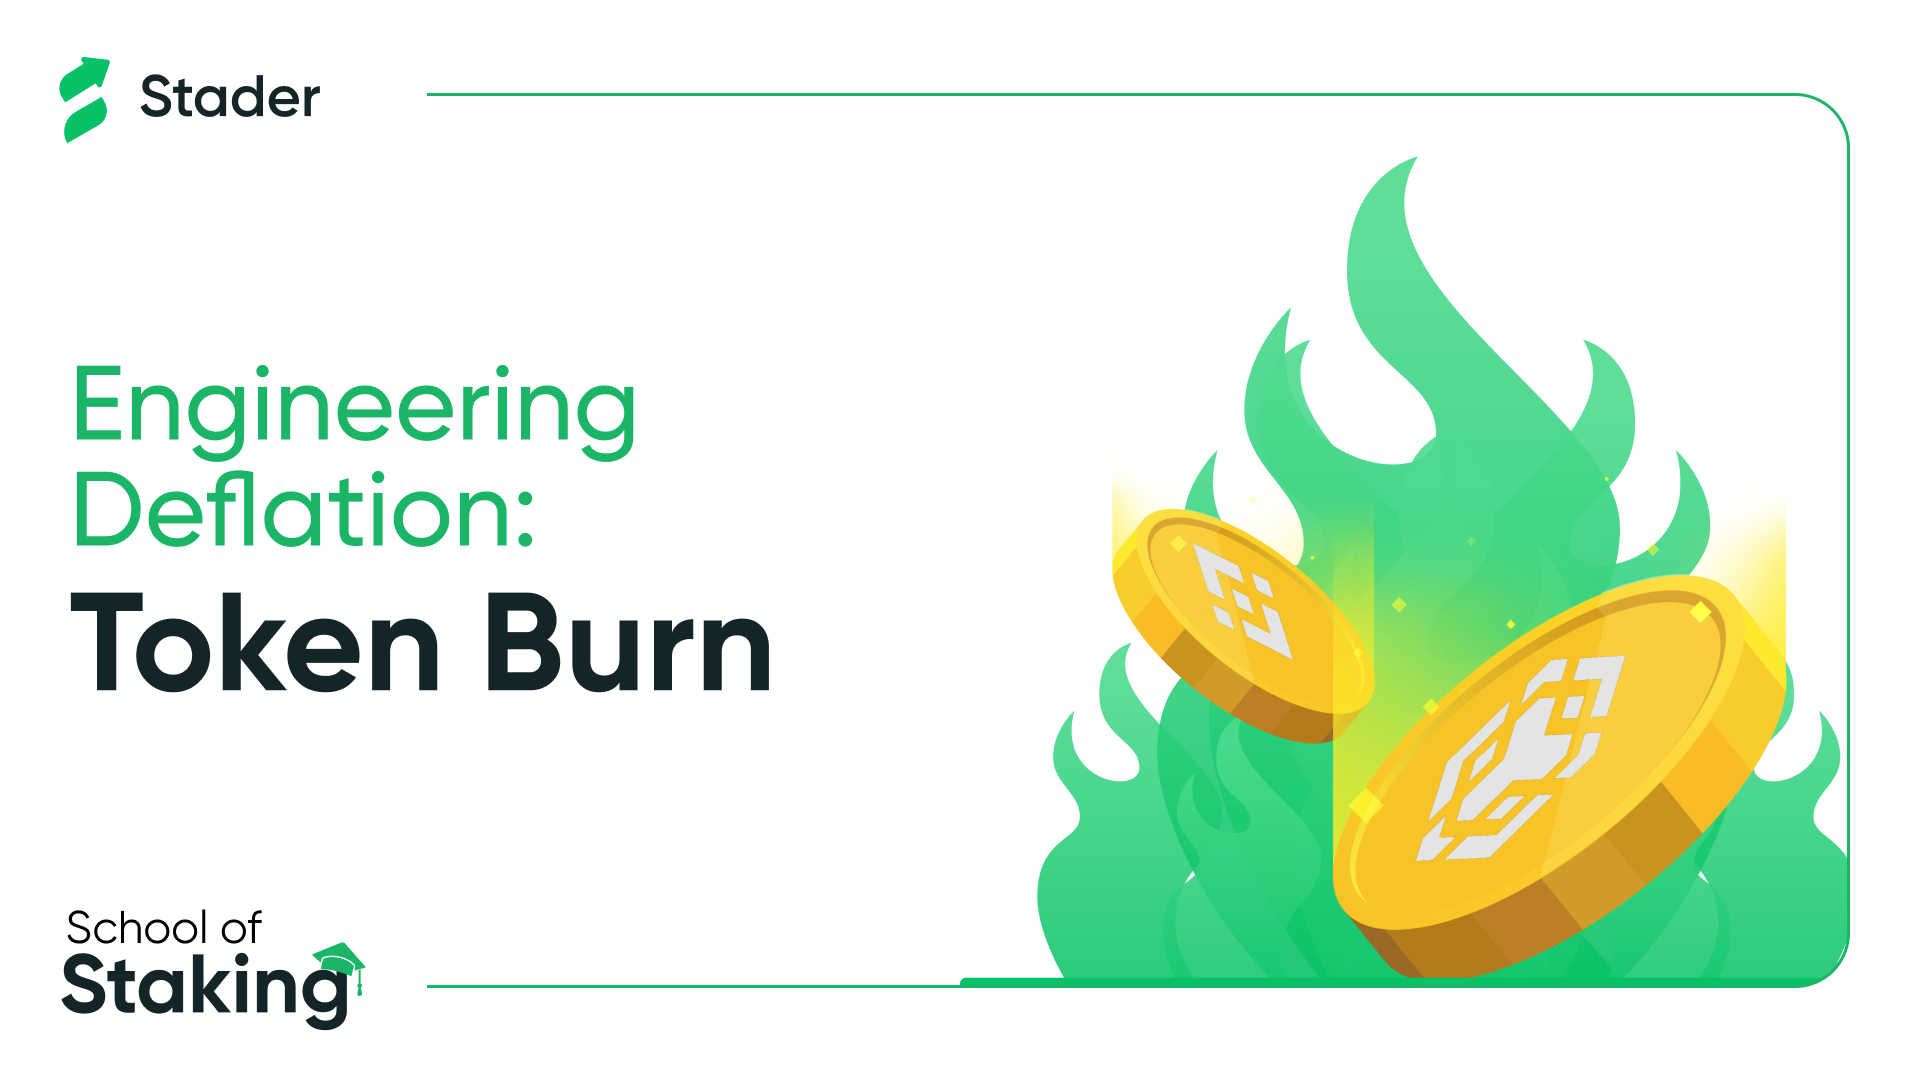 What is token burn & why is it needed?